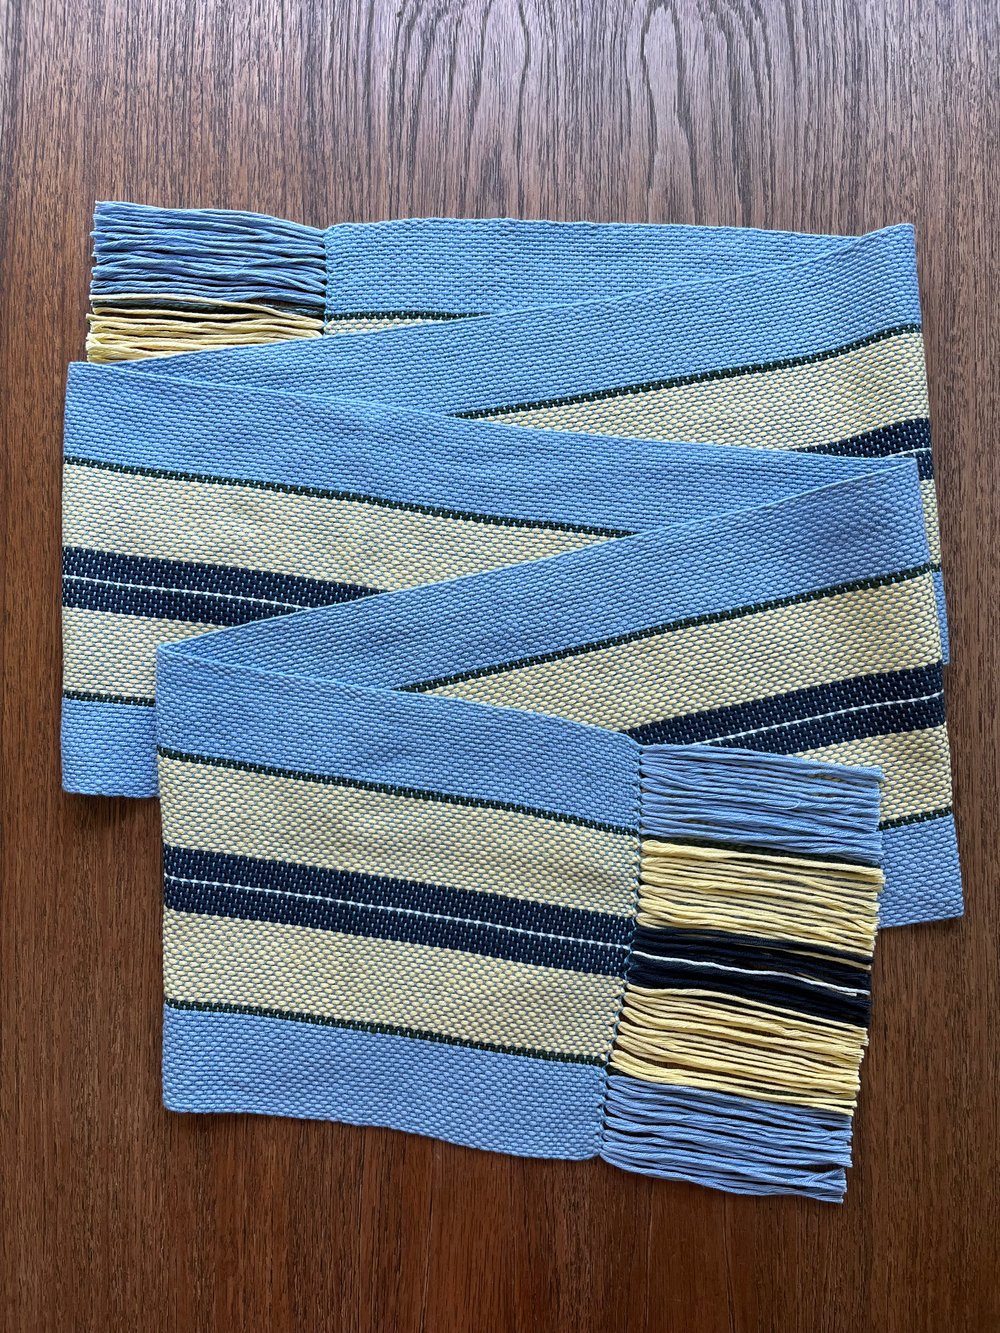 The Summer Book Scarf